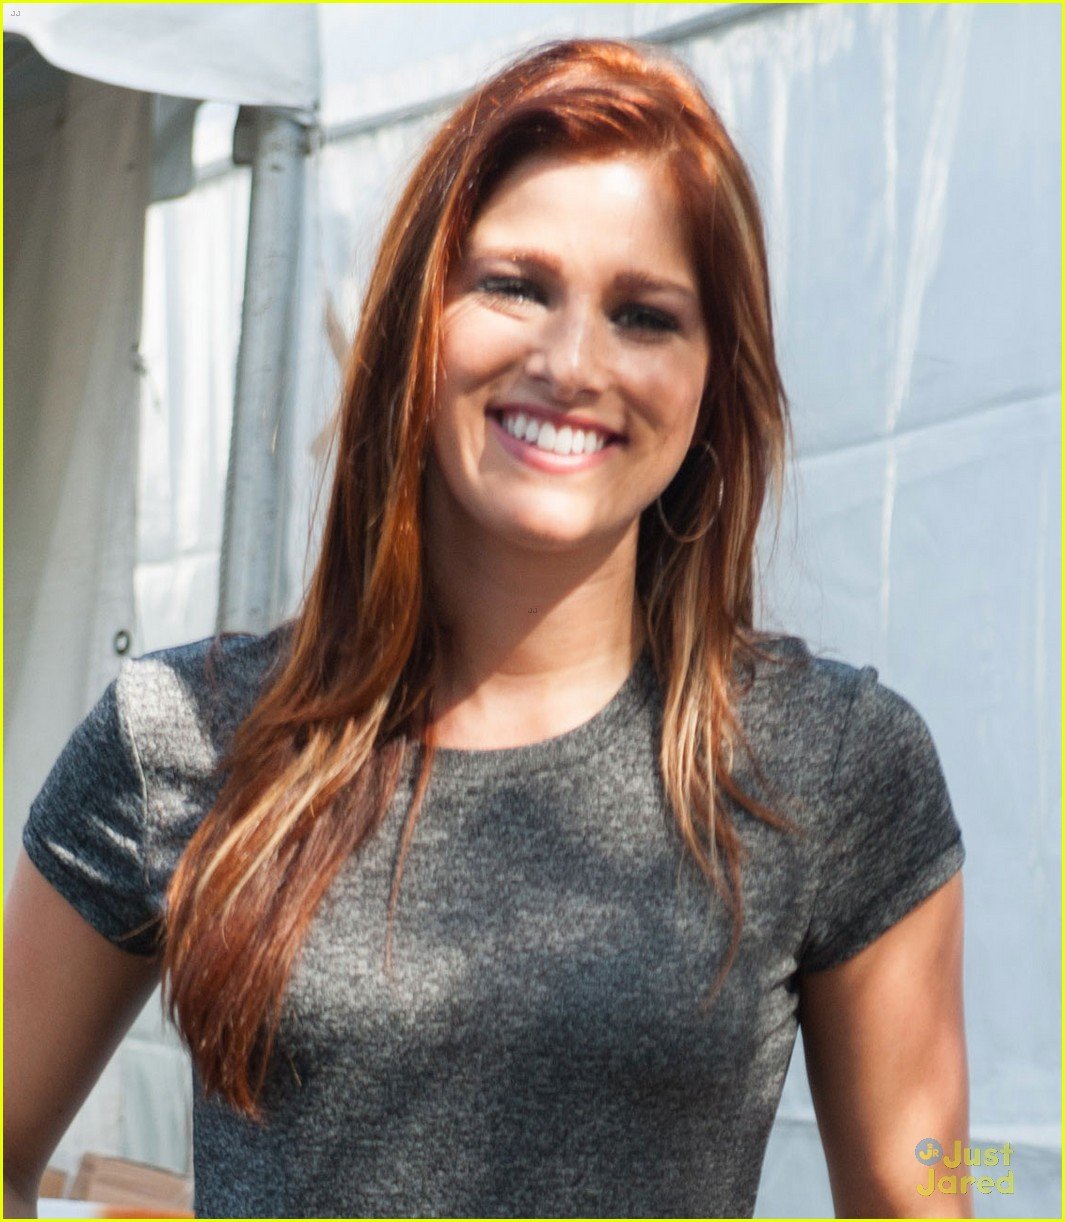 Cassadee Pope 99.9 Kiss Country Chili CookOff! Photo 639080 Photo